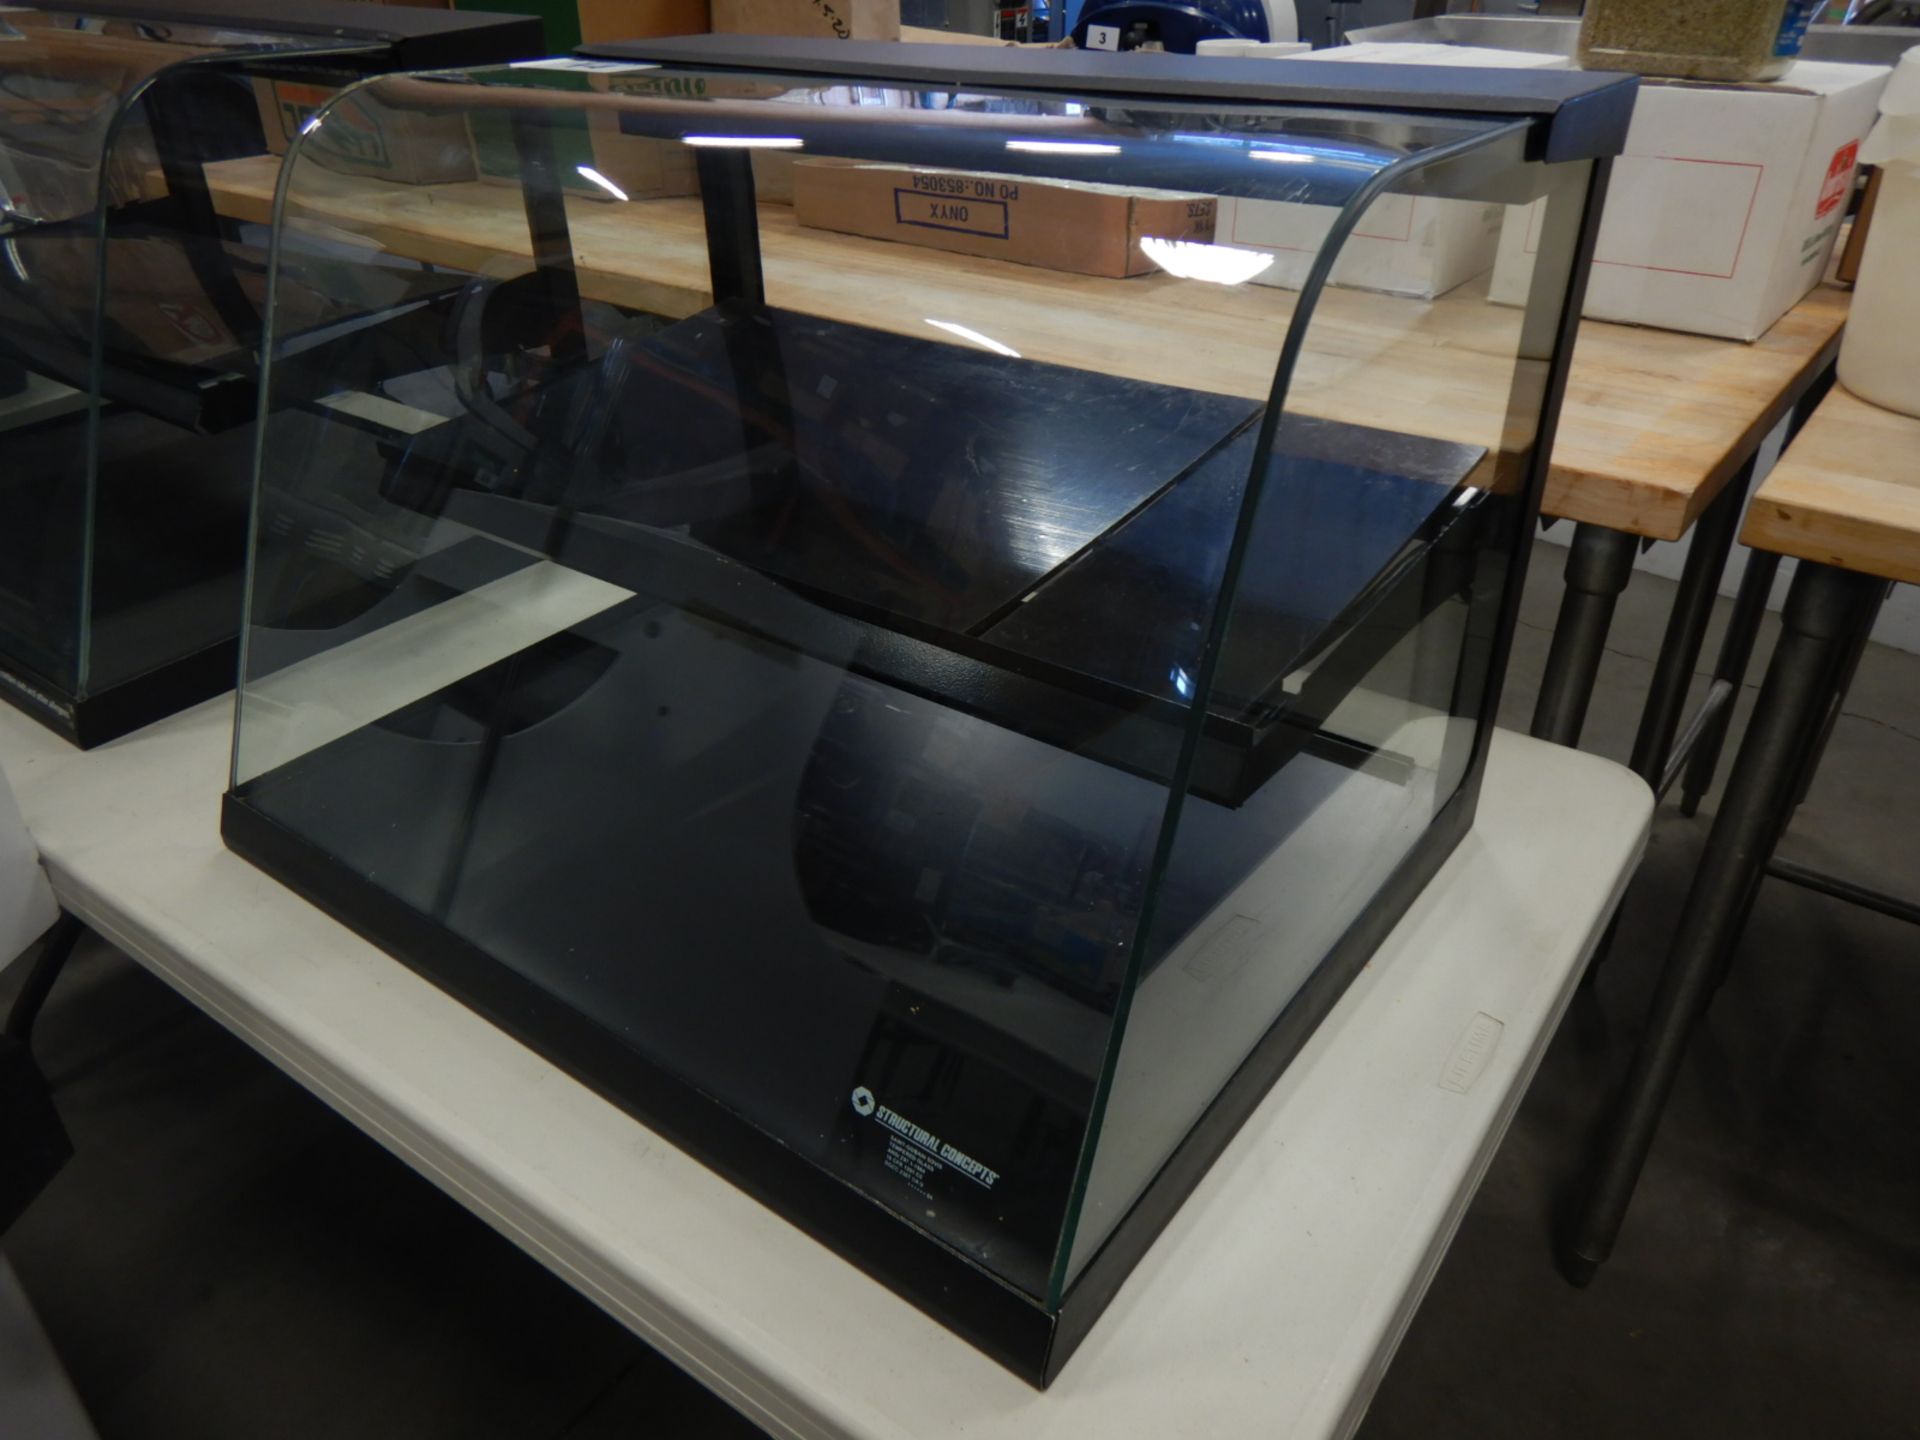 STRUCTURAL CONCEPTS 27” CURVED GLASS DRY COUNTERTOP SHOWCASE